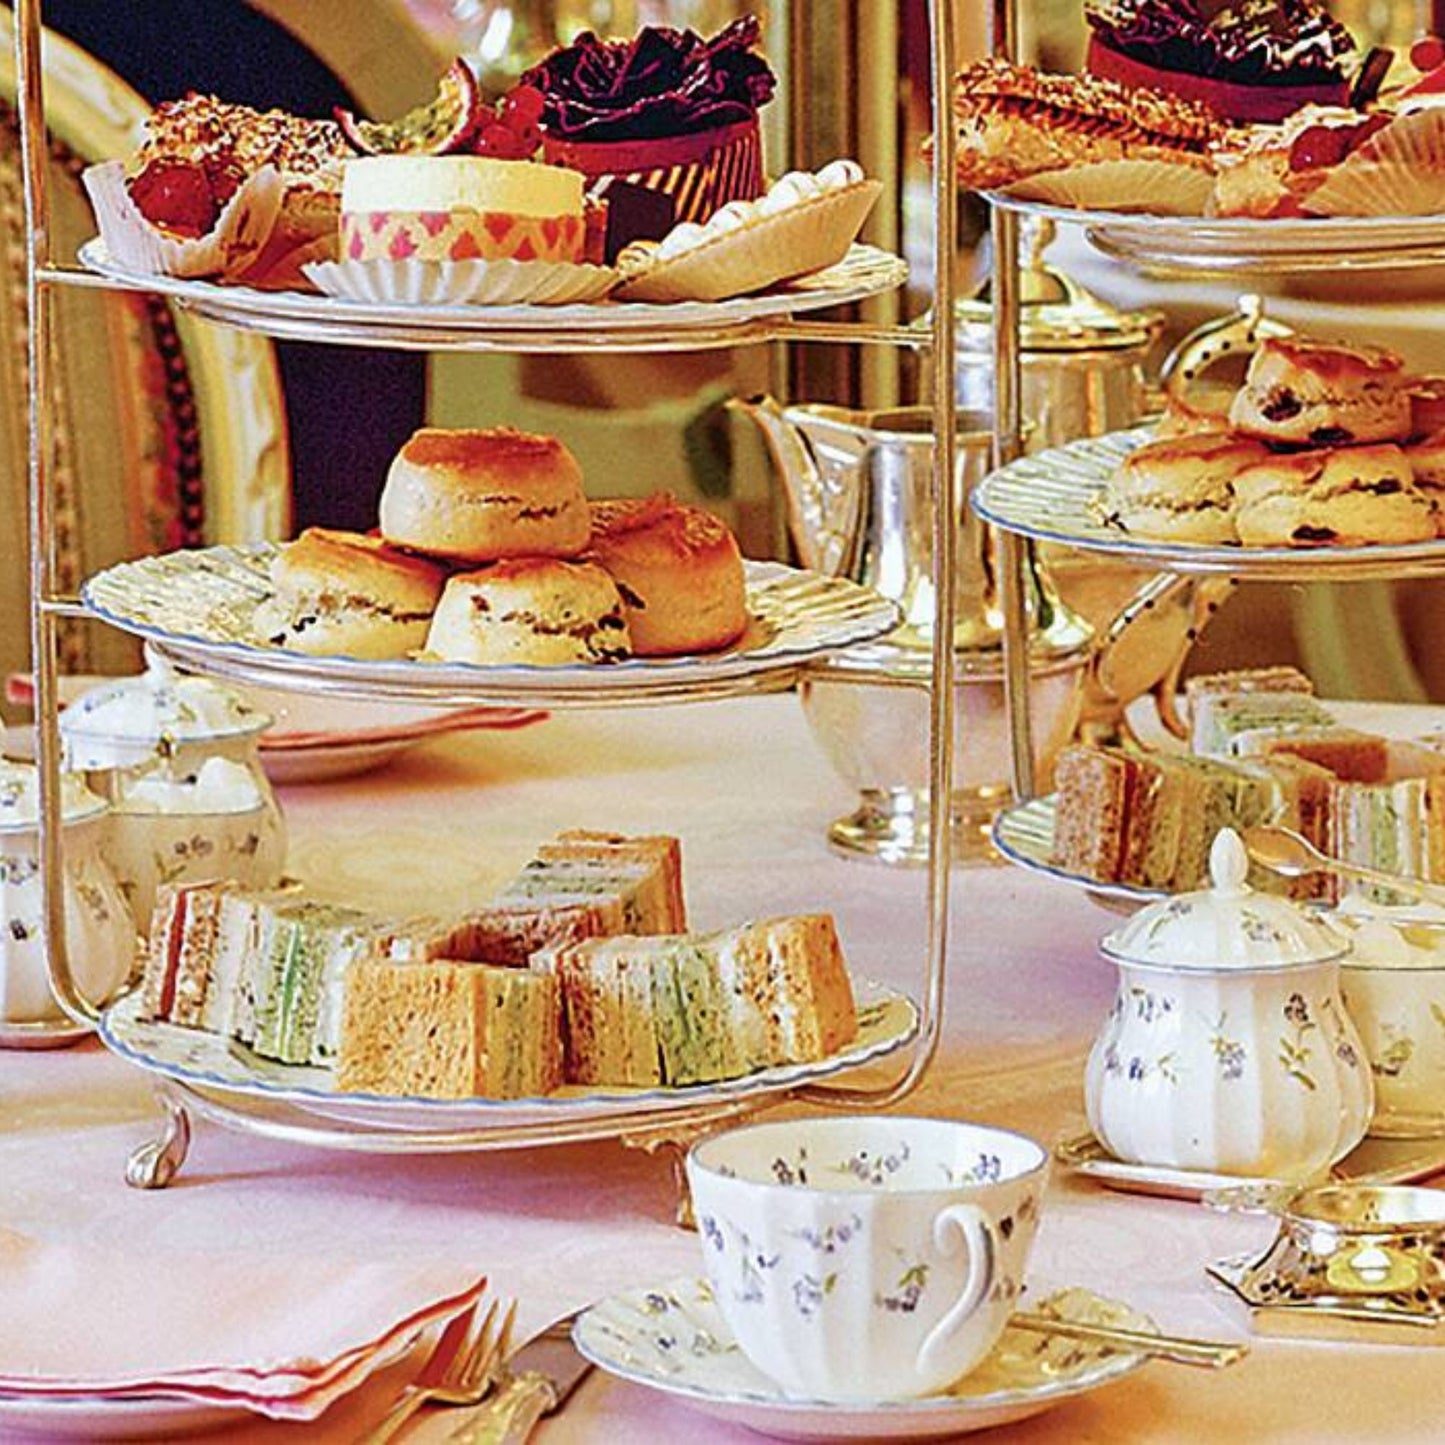 Unlimited High Tea Buffet for 1 or 2 people at Hotel Sanora (on Sunday afternoons)